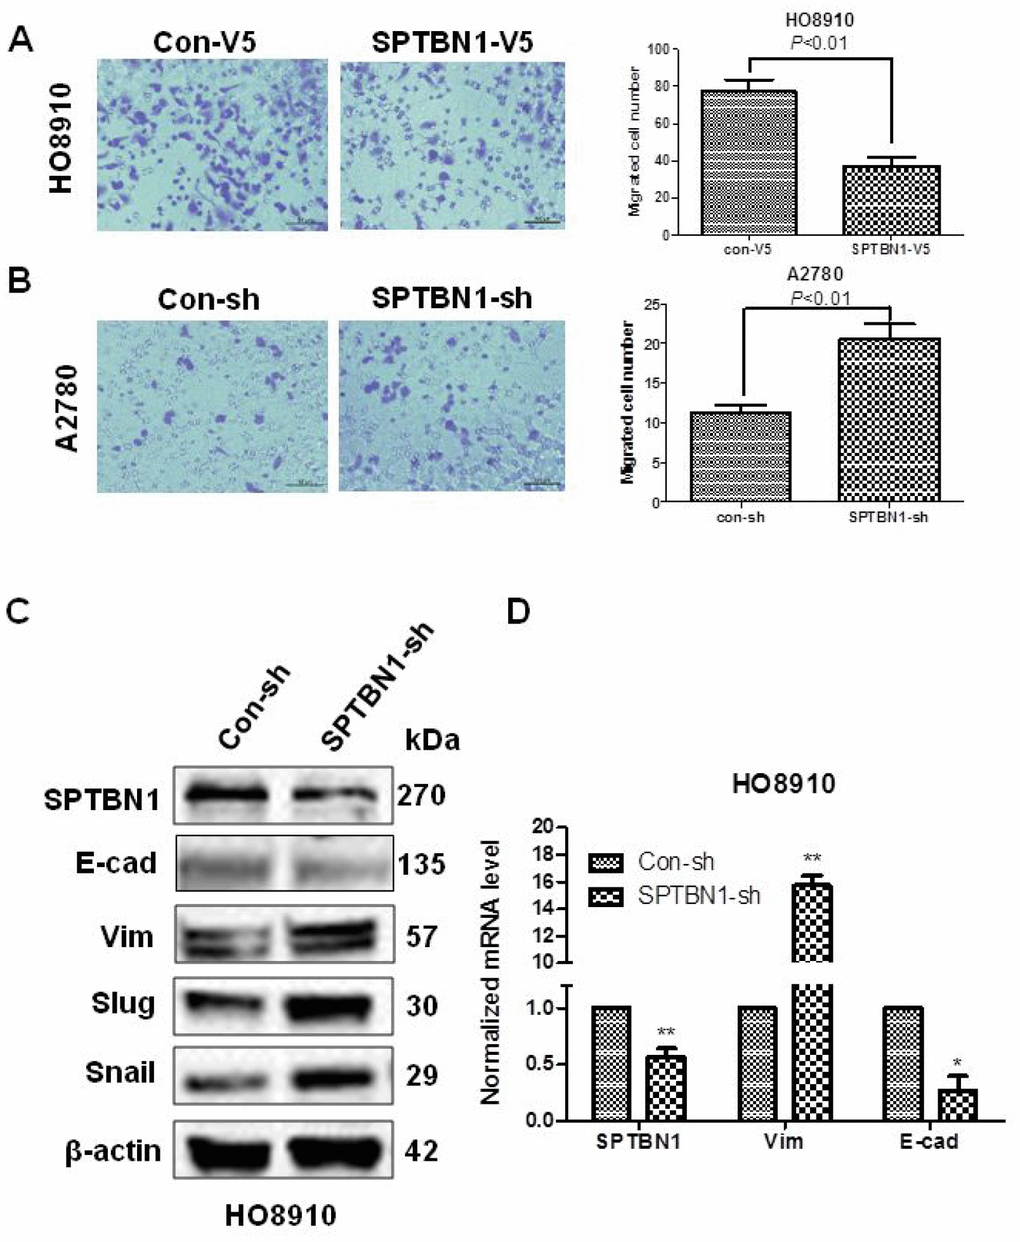 SPTBN1 inhibits the migration and EMT of epithelial ovarian cancer cells. (A, B) Assessments of cell migration. Overexpression of SPTBN1 inhibits the migration of HO8910 cells (A), while downregulation of SPTBN1 promotes the migration of A2780 cells (B). (C, D) Comparison of EMT-related markers at the protein level (C) and mRNA level (D). * P P 